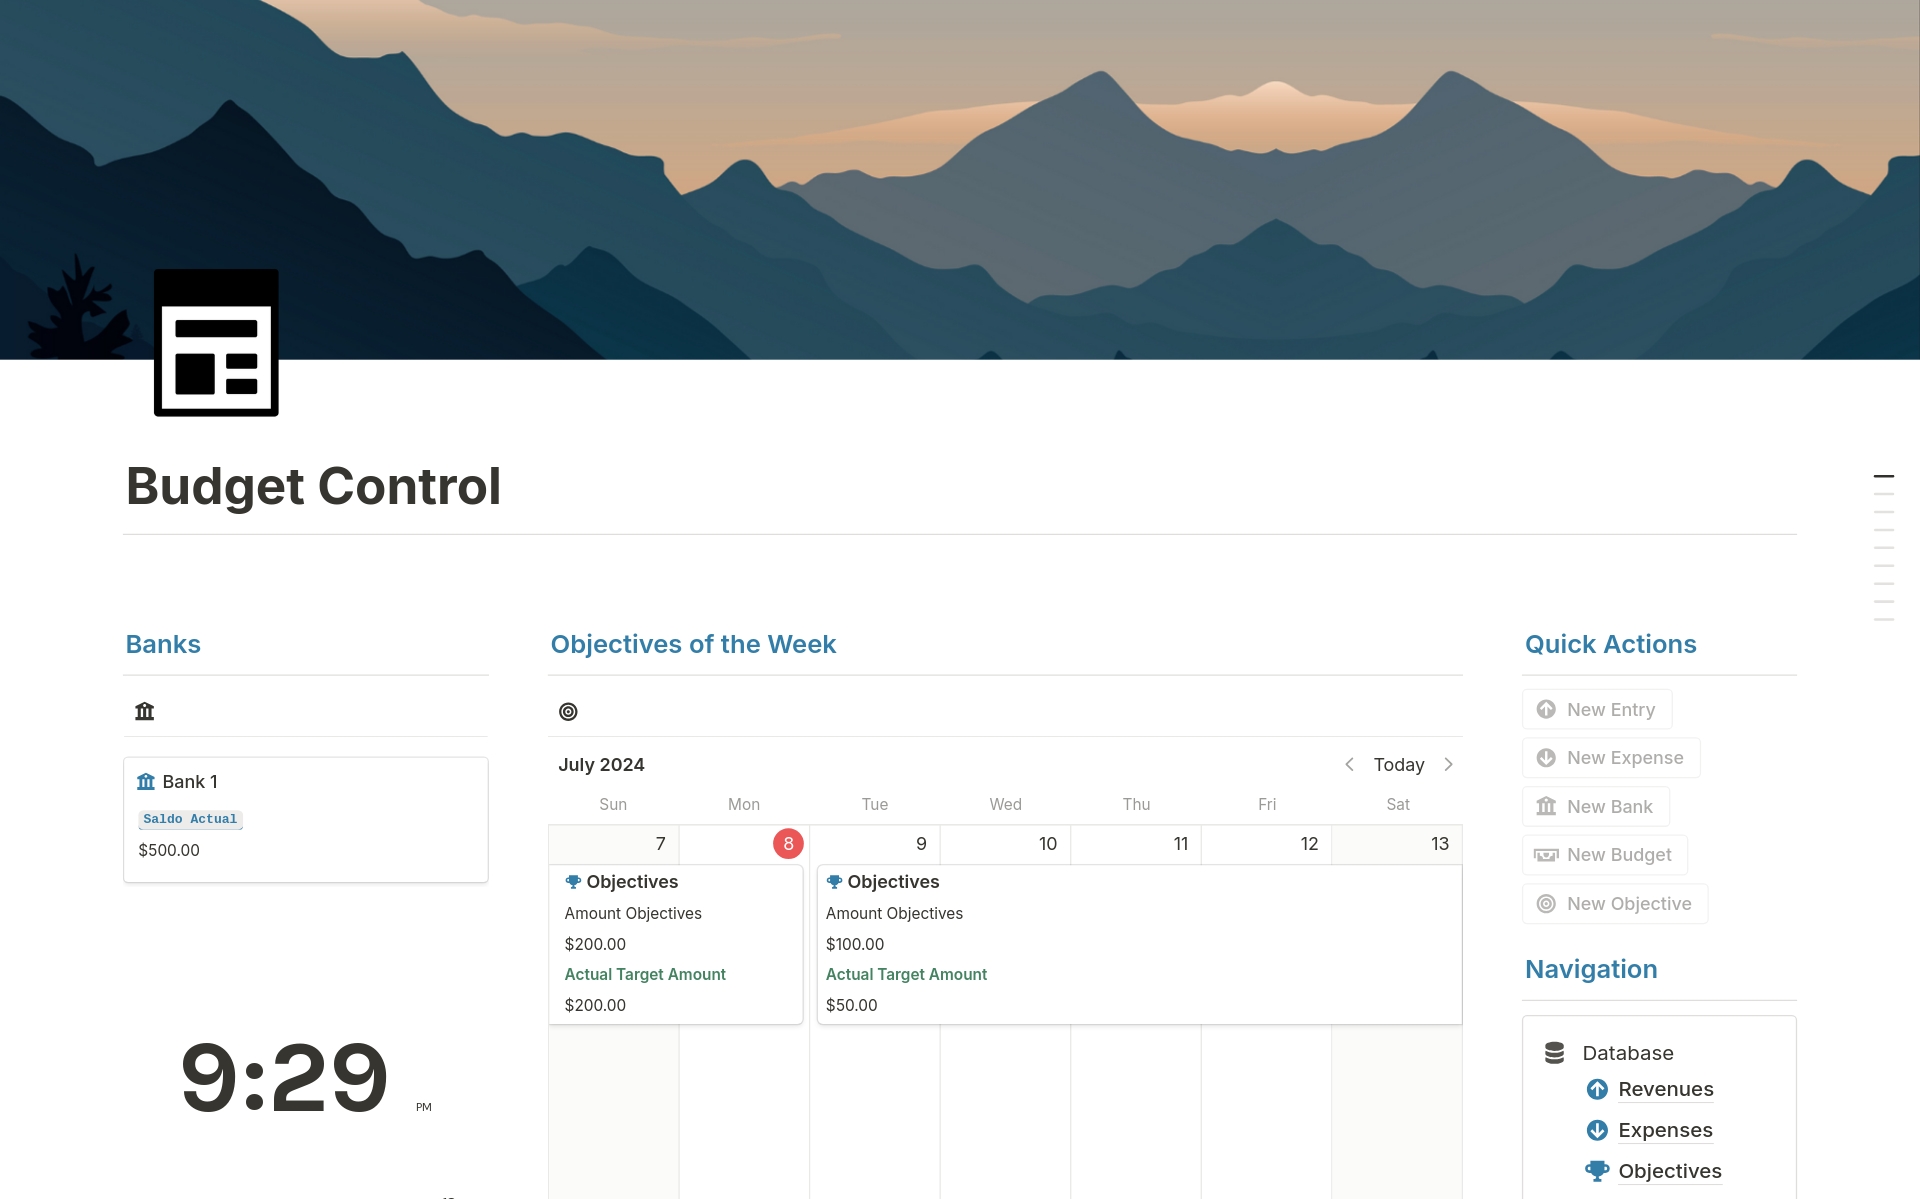 Keeping a budget can be complicated without the right tools. Our Budget Control template in Notion will help you plan and track your spending, ensuring that your money is always under control and working in your favor.